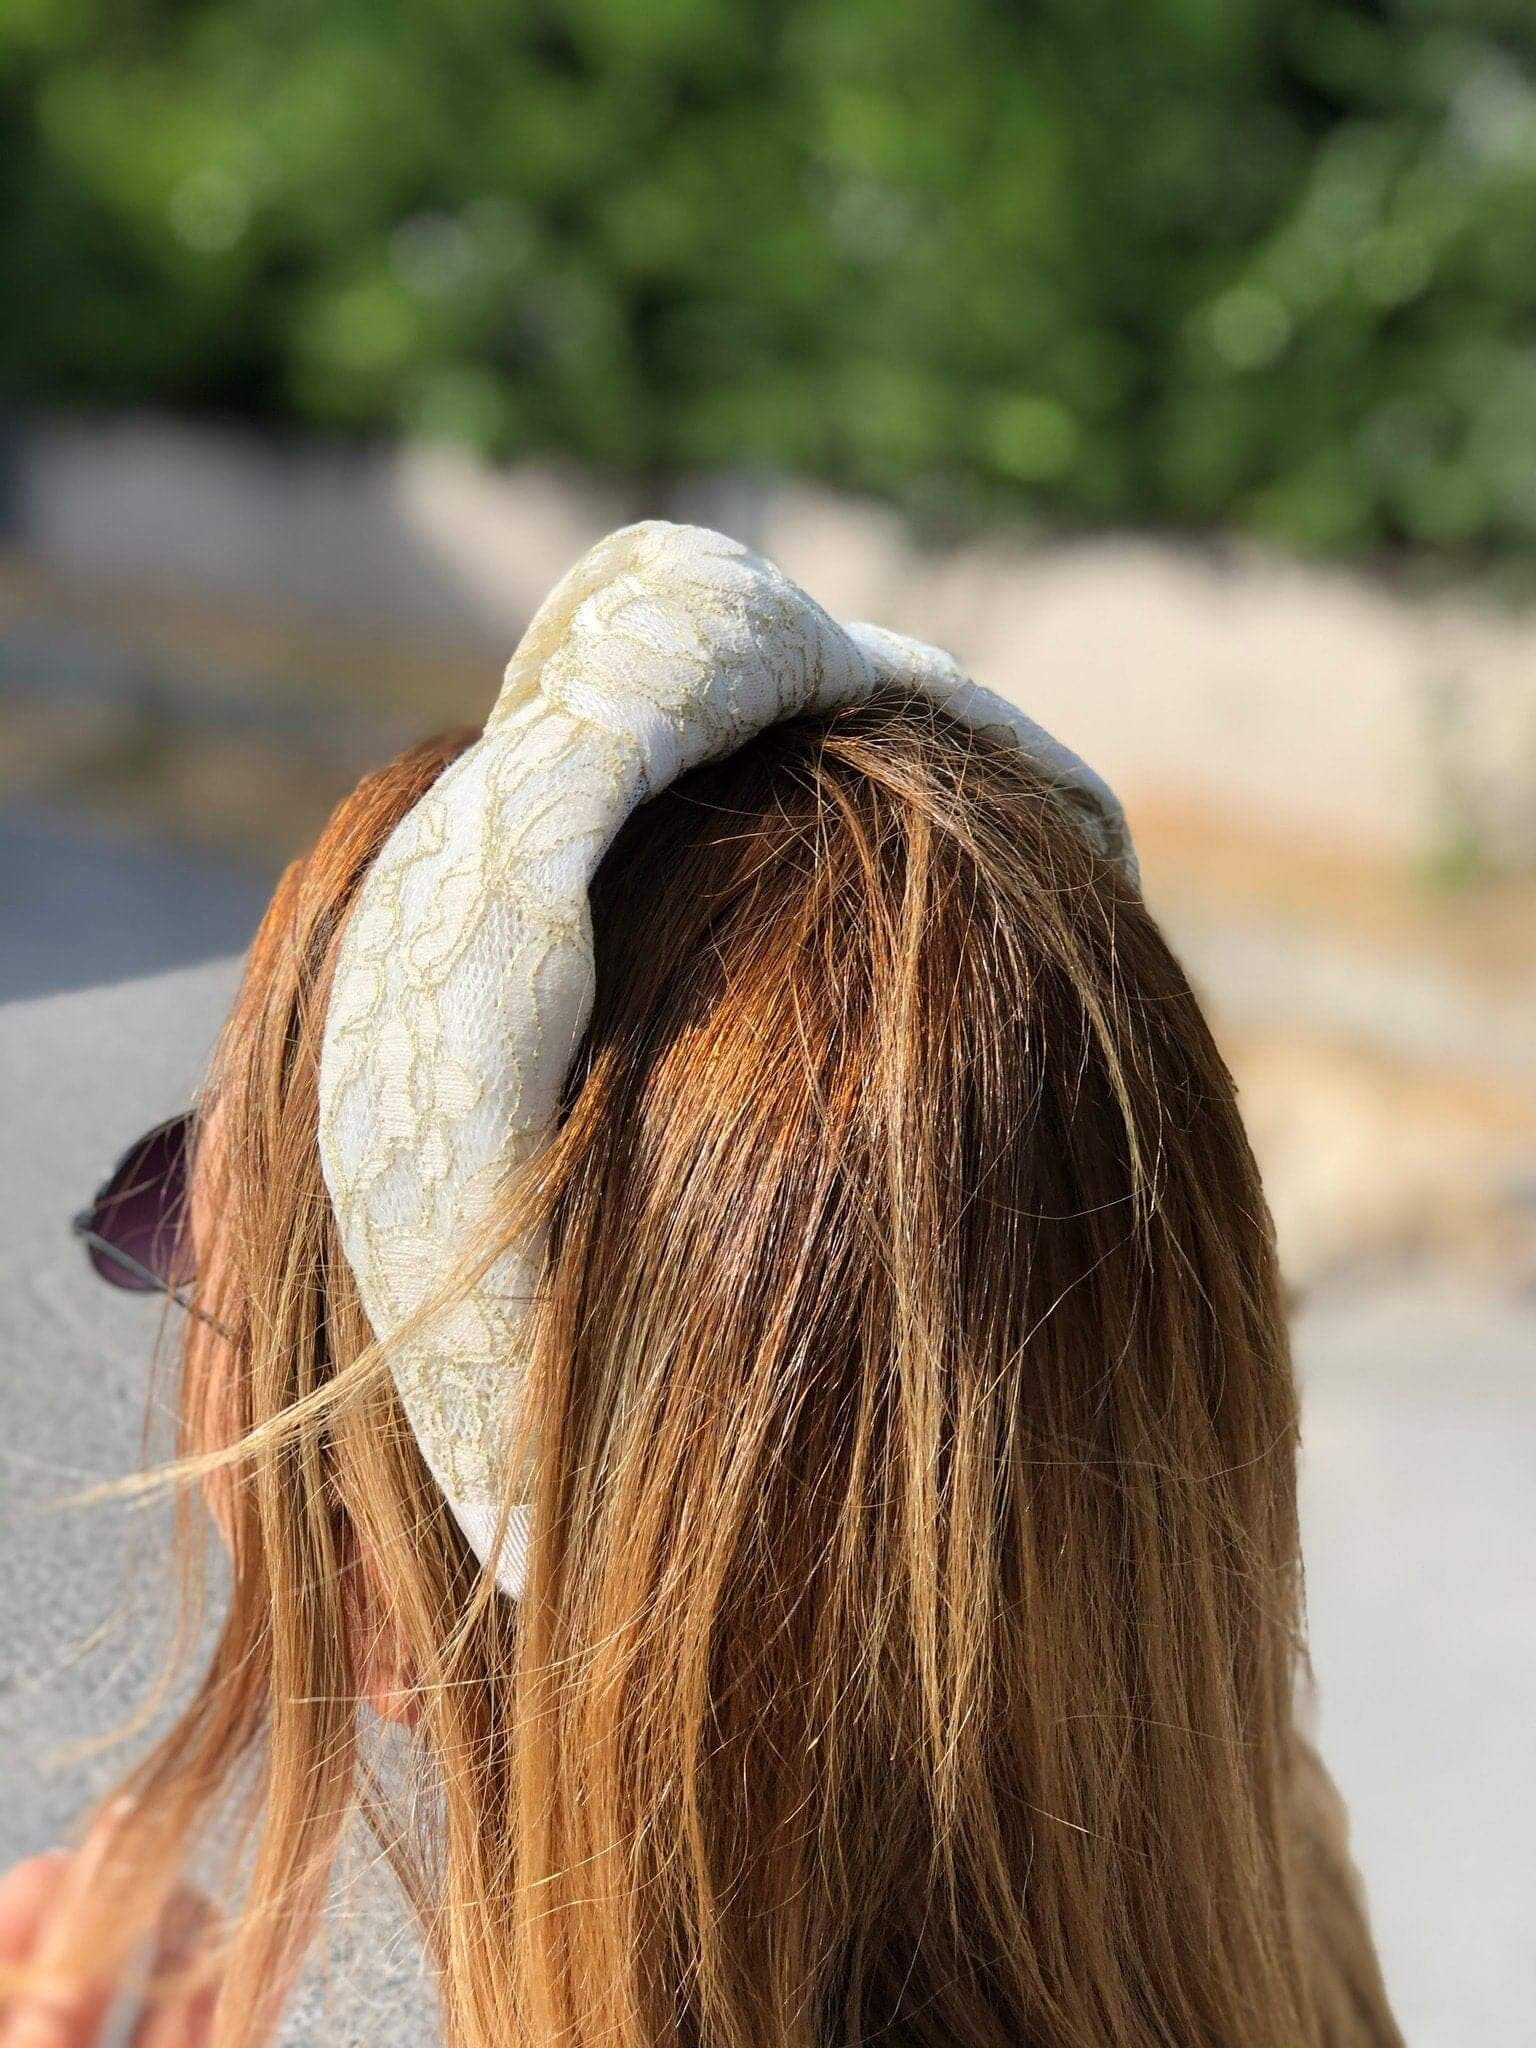 Complete your bridal look with this stunning Wedding Headband in white